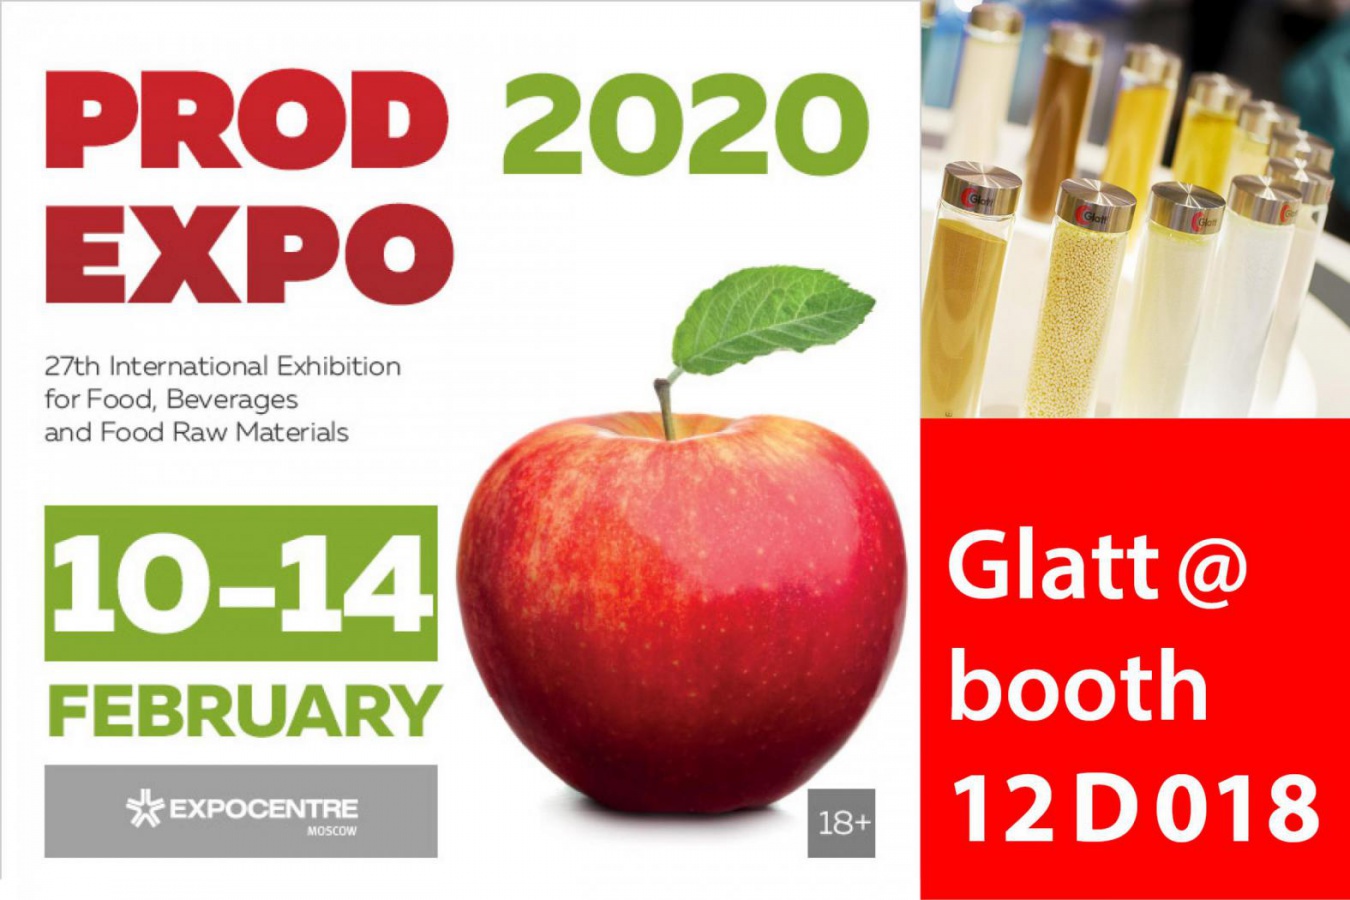 Prodexpo 2020, Moscow: Meet the Glatt Experts @ booth 12D018 Check out the advantages of innovative particle design of your food and feed ingredients